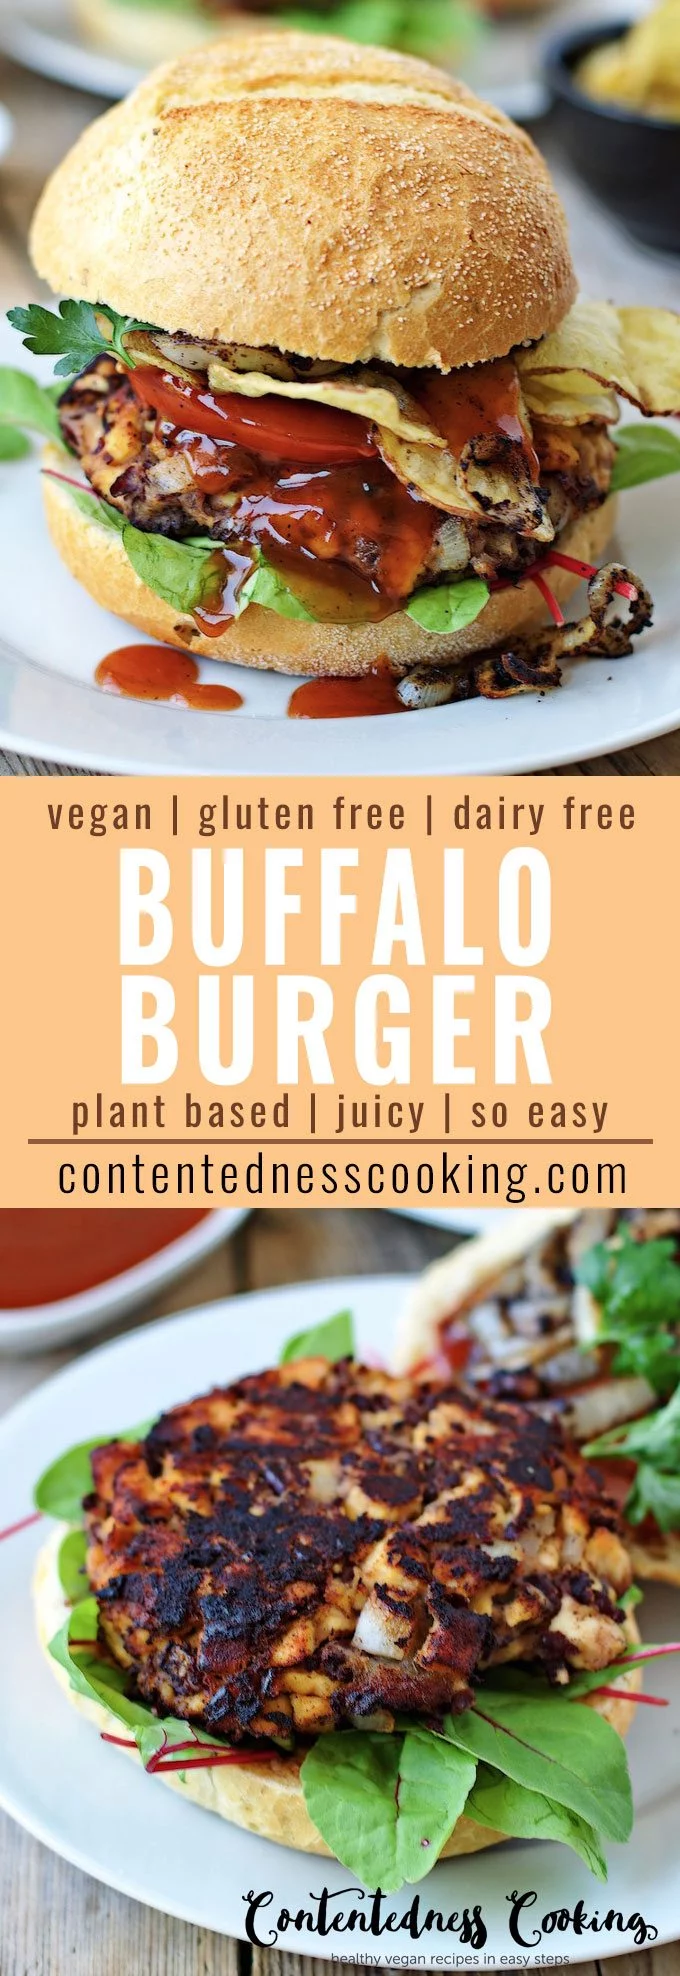 Collage of two pictures of the Vegan Buffalo Burger with recipe title text.